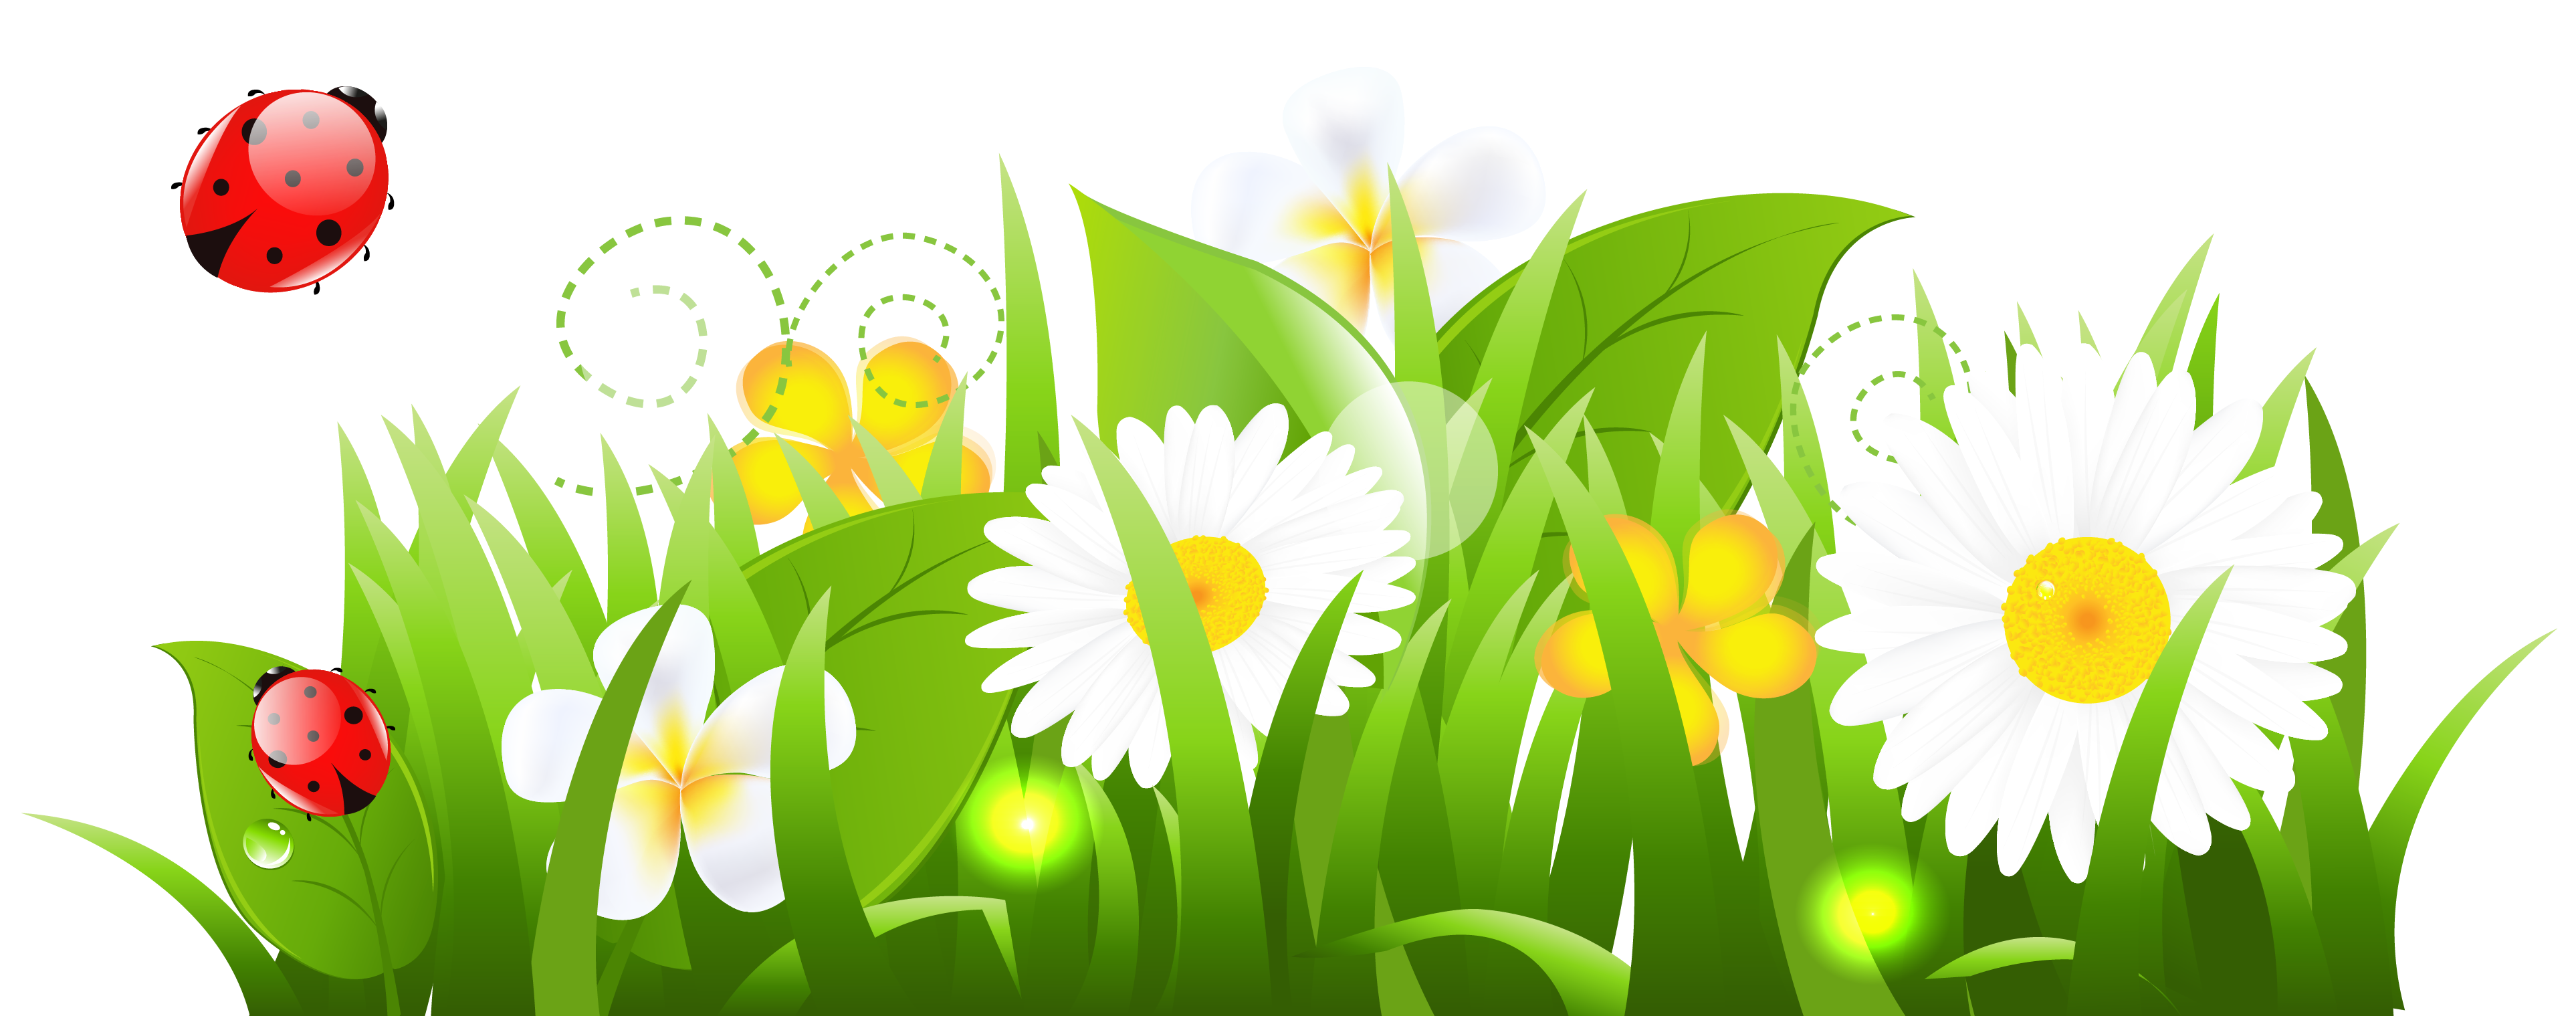 May Grass And Flowers Clipart Clipart